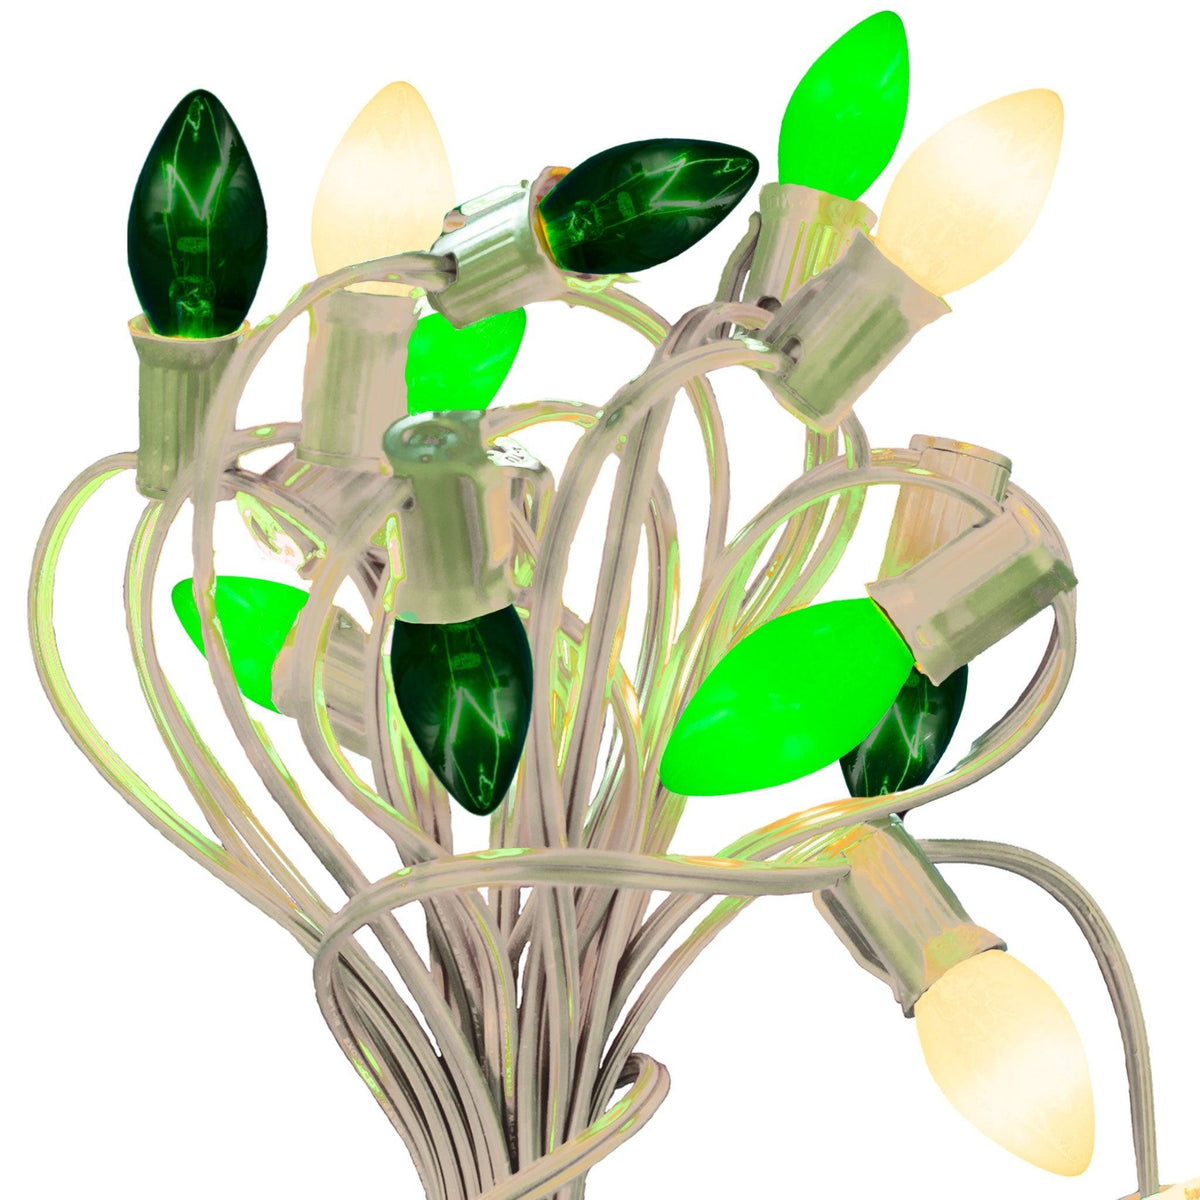 Introducing Lee Display's brand new C7/C9 Candelabra Style St. Patrick's Day Themed Light Sets on sale now at leedisplay.com